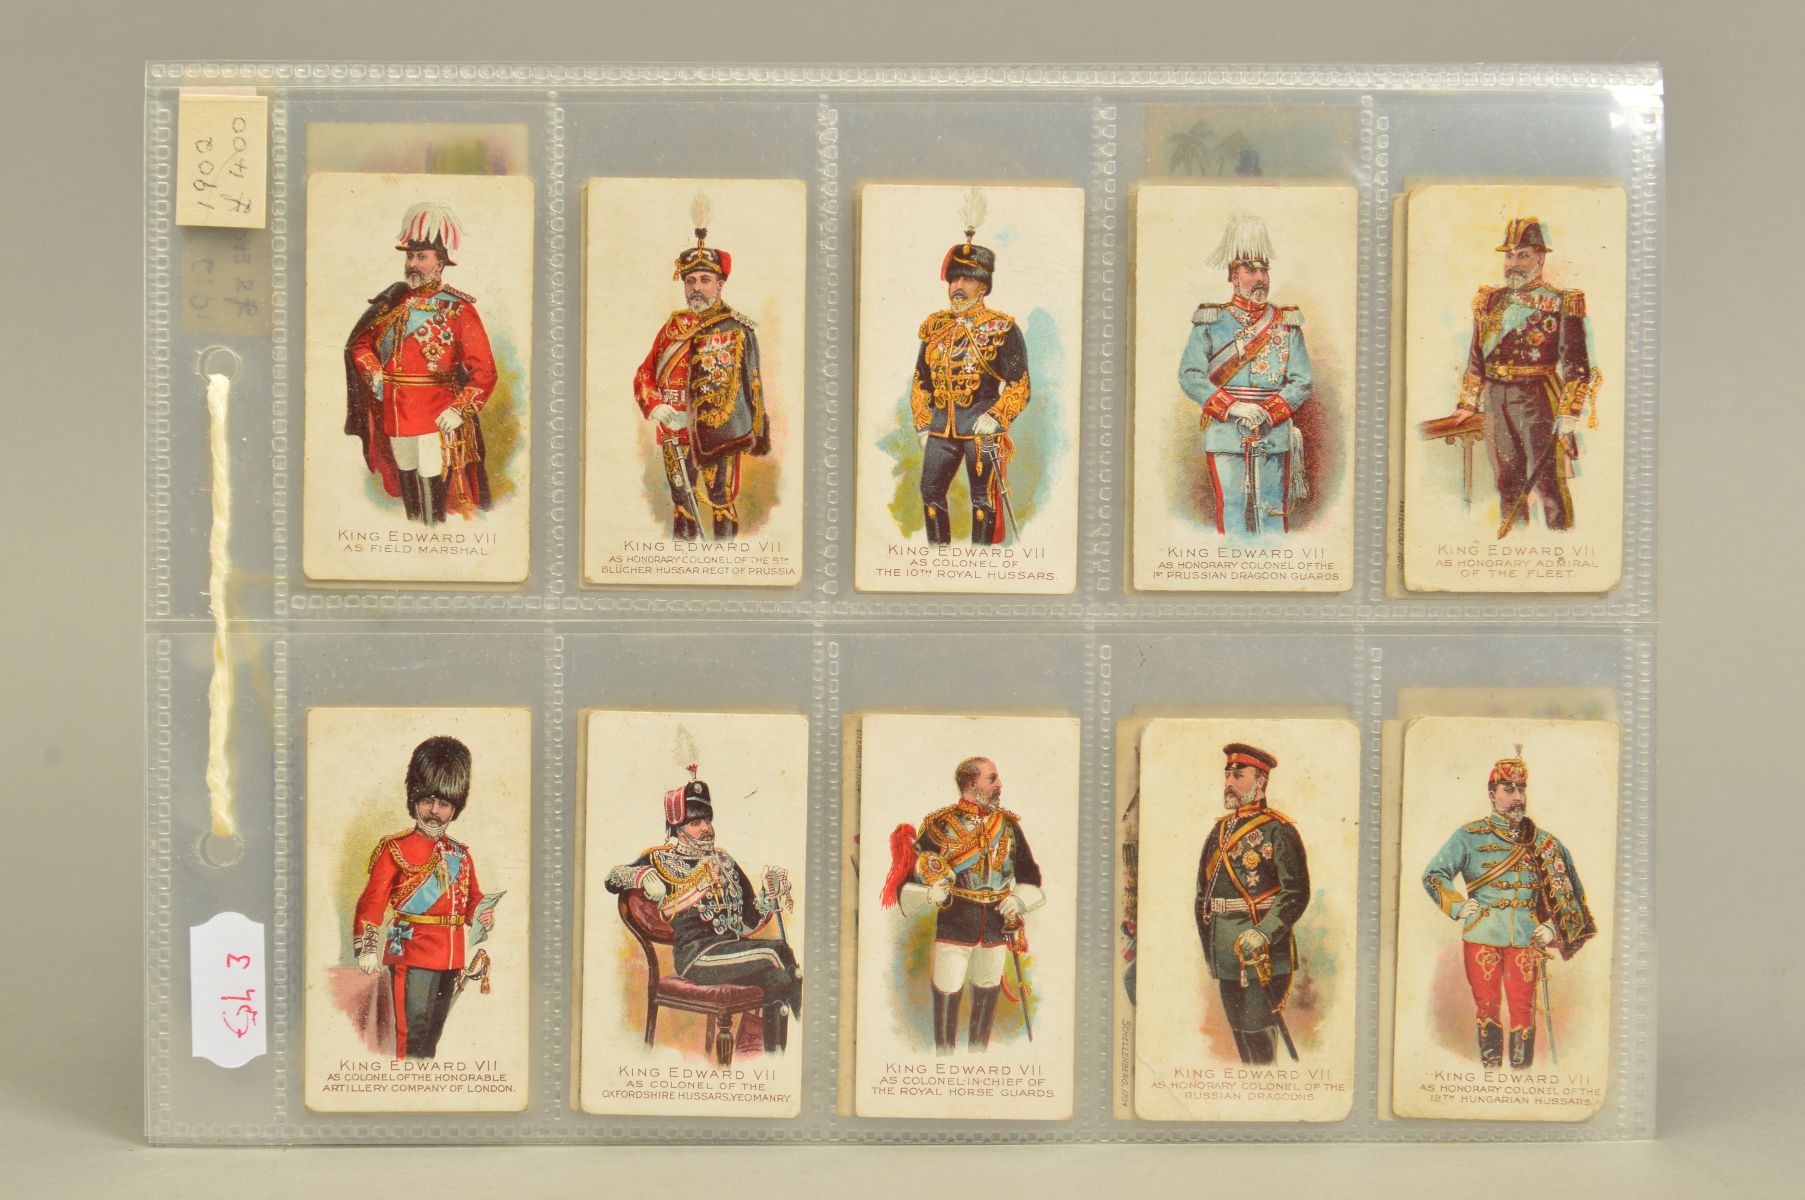 A COLLECTION OF FIFTY SEVEN TADDY'S CIGARETTE CARDS ON A MILITARY THEME, featuring incomplete sets